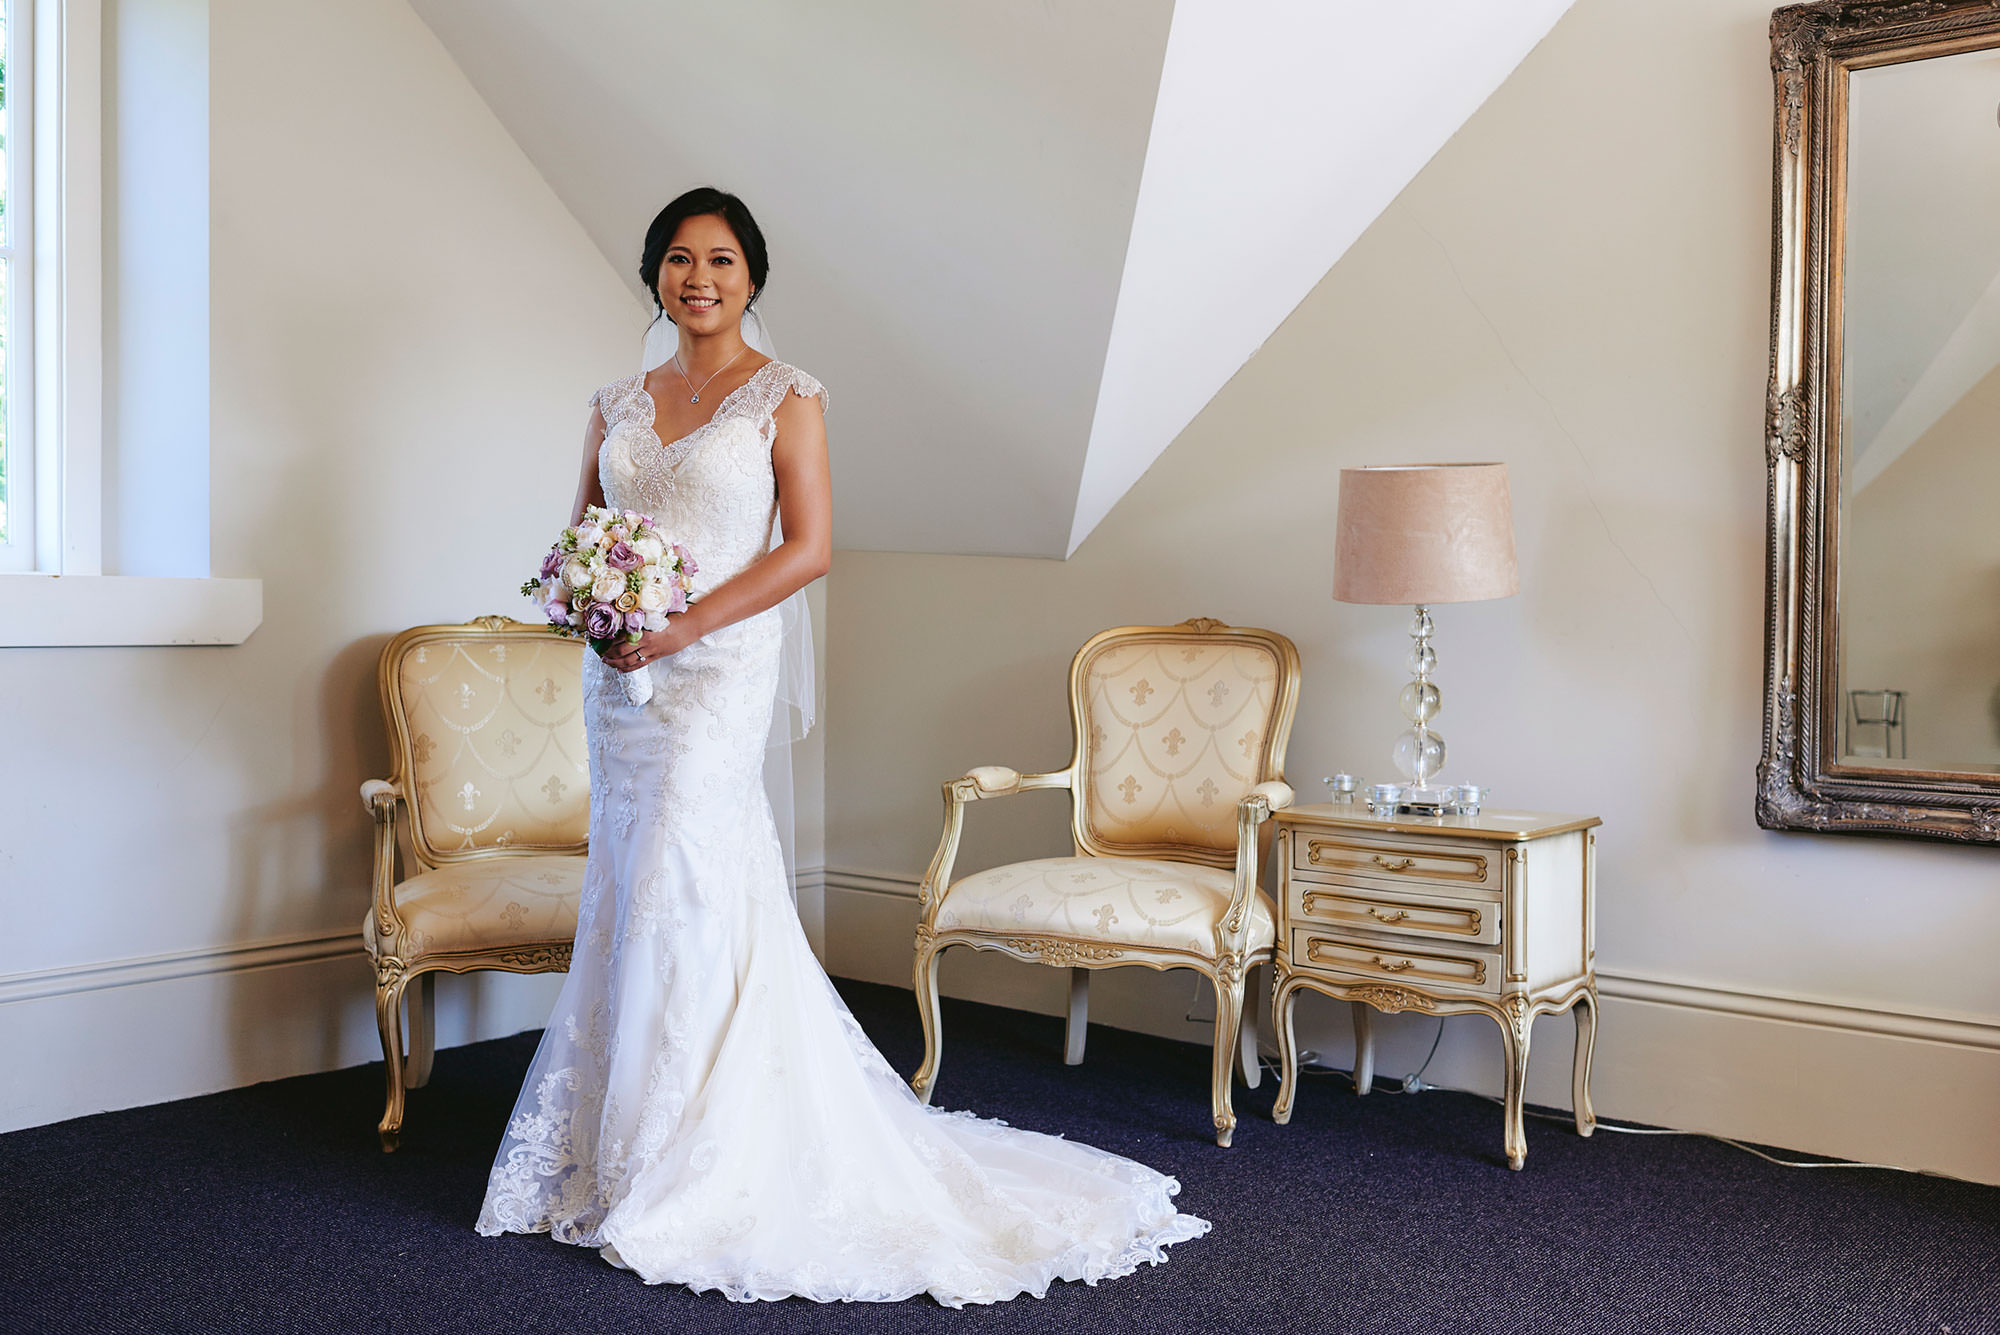 Bride ready for wedding at Oatlands House